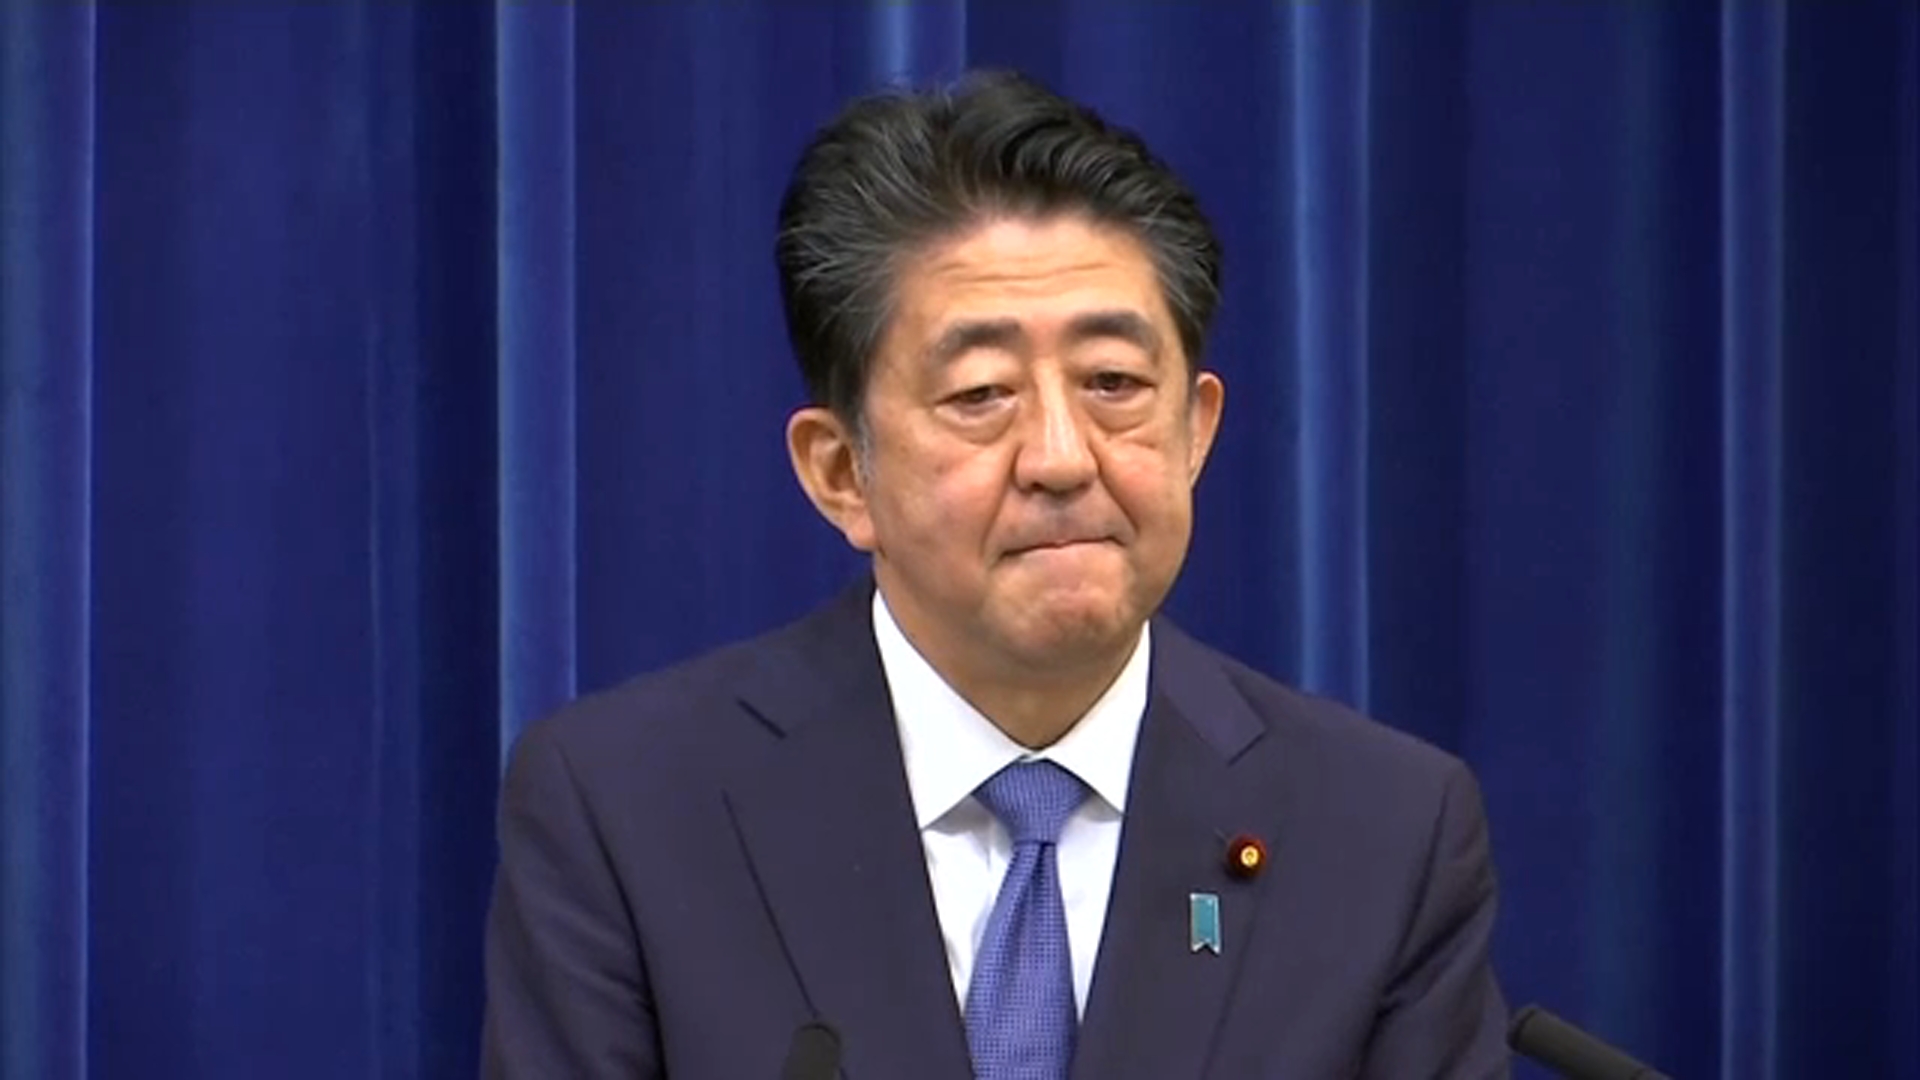 Japan's Prime Minister resigns: Shinzo Abe says he is stepping down for health reasons San Francisco